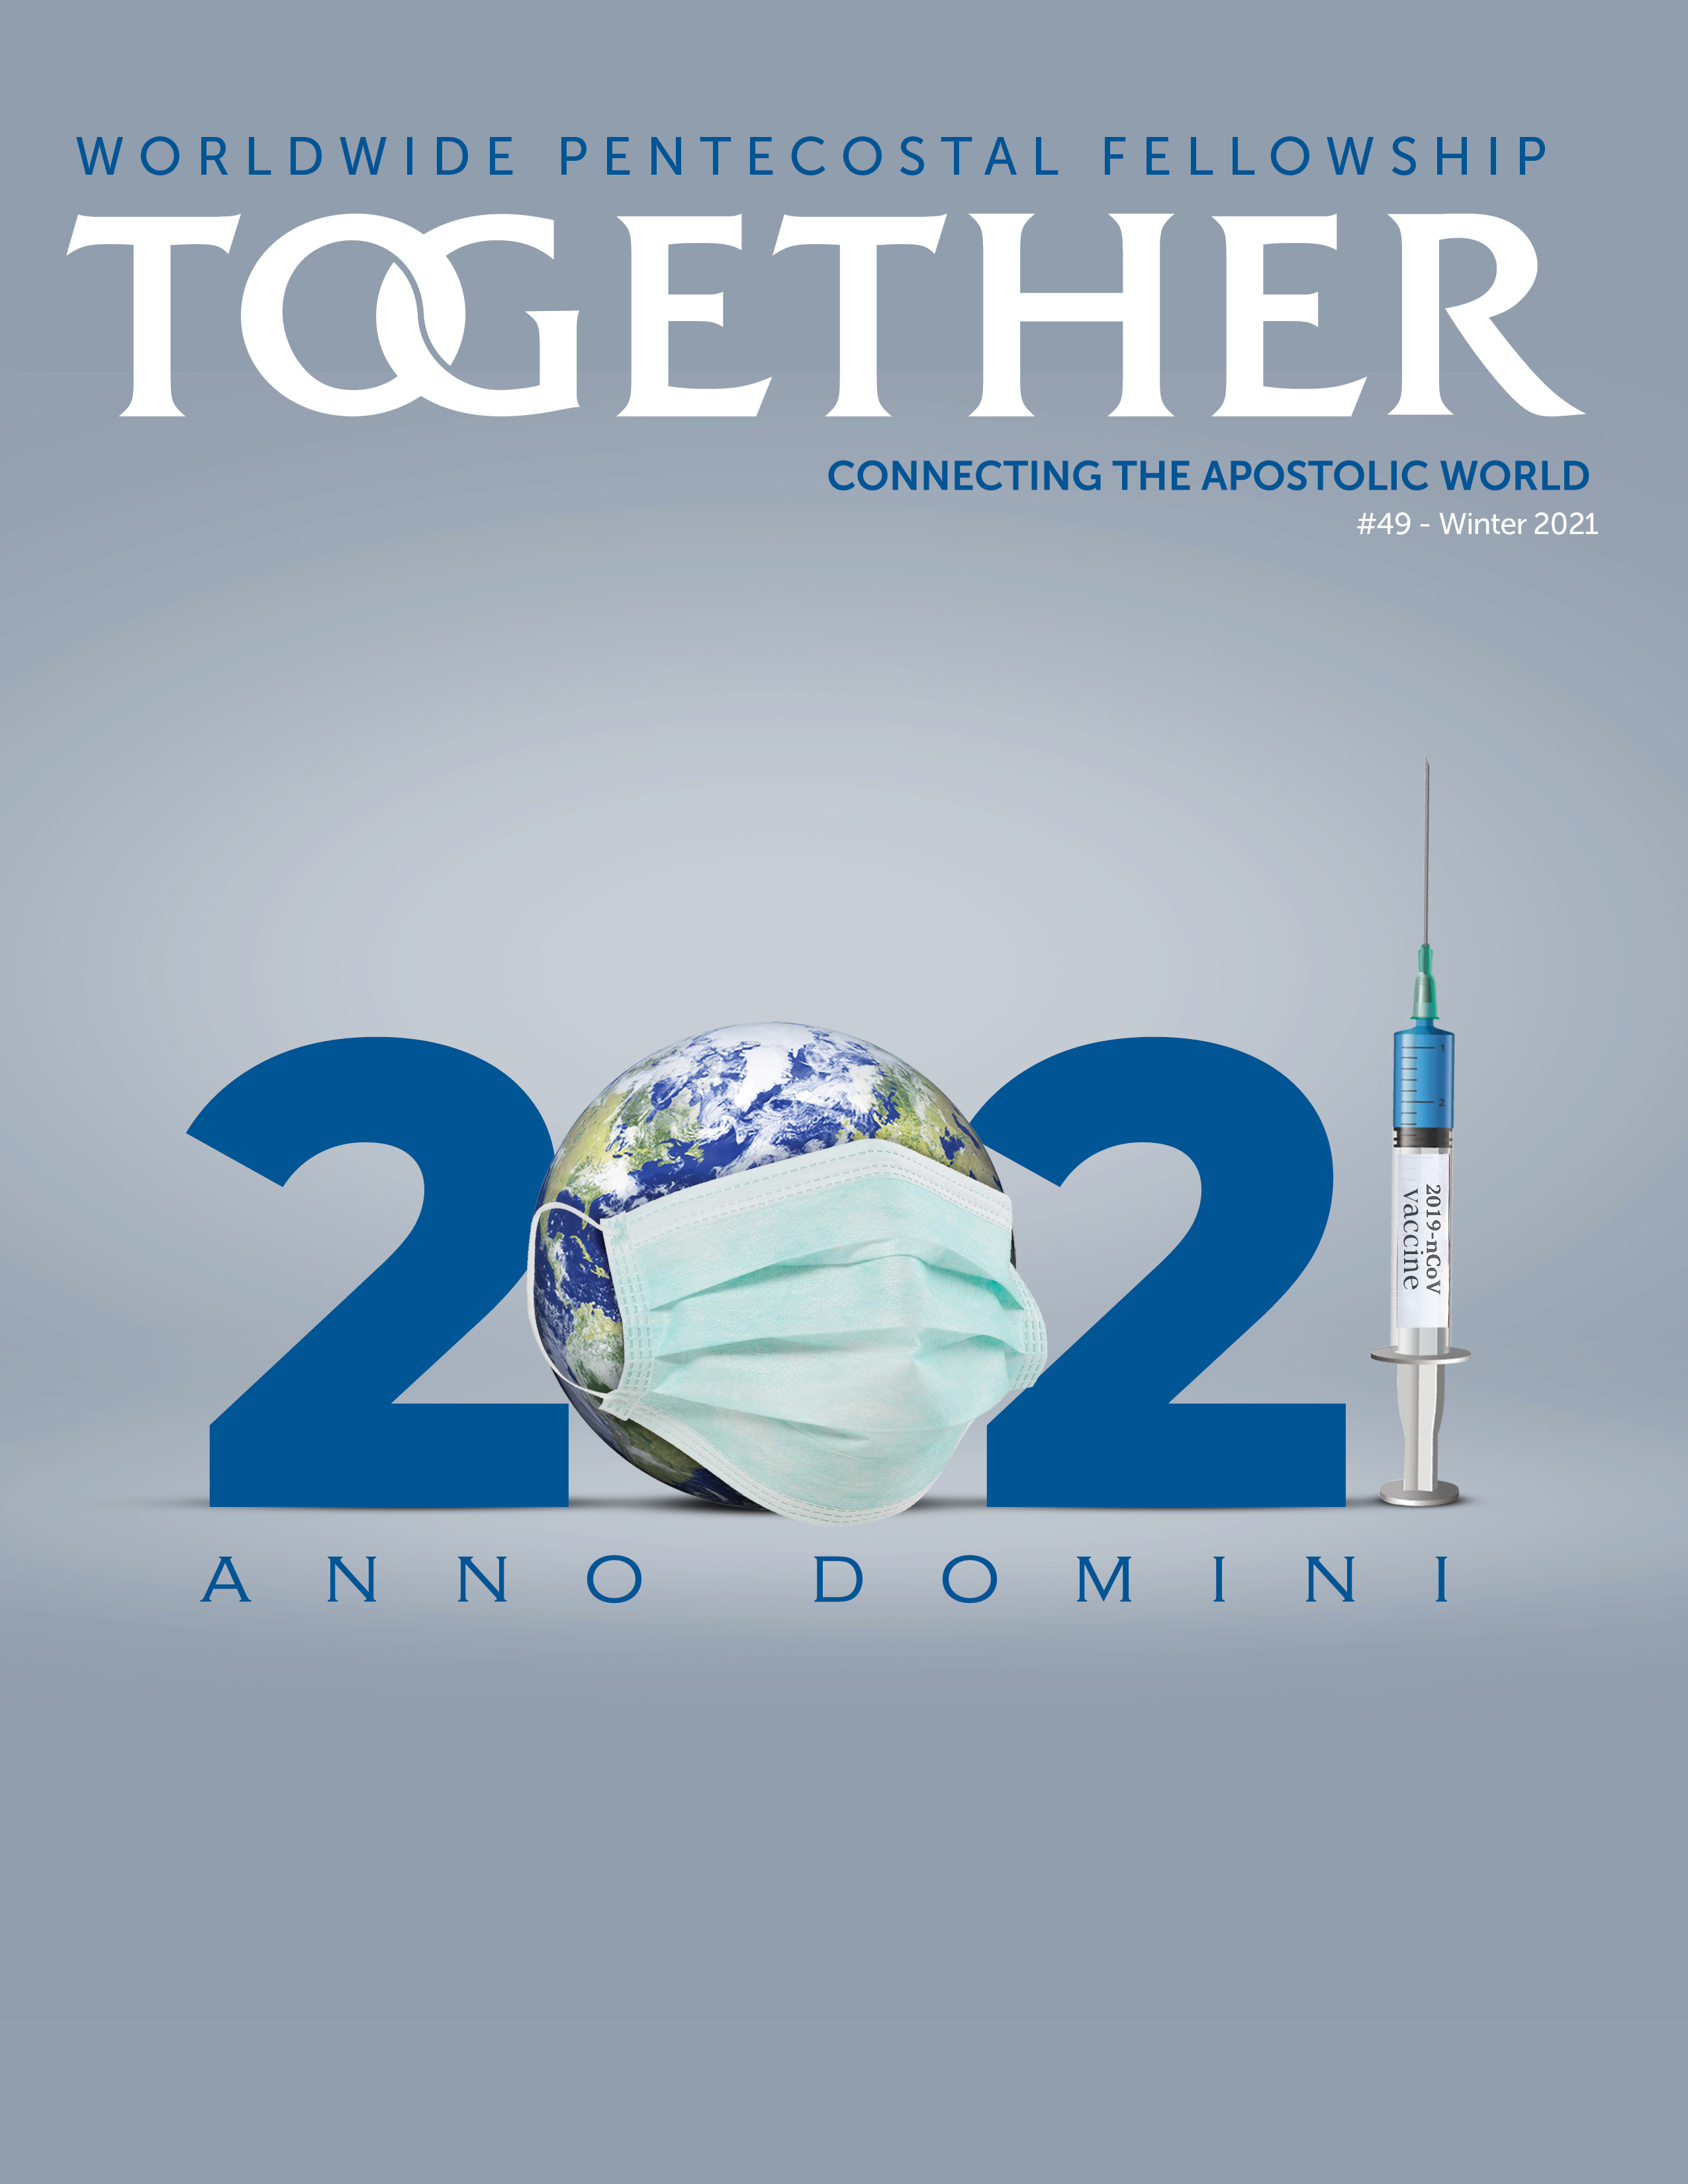 Together Magazine 1-Year Subscription (PDF)